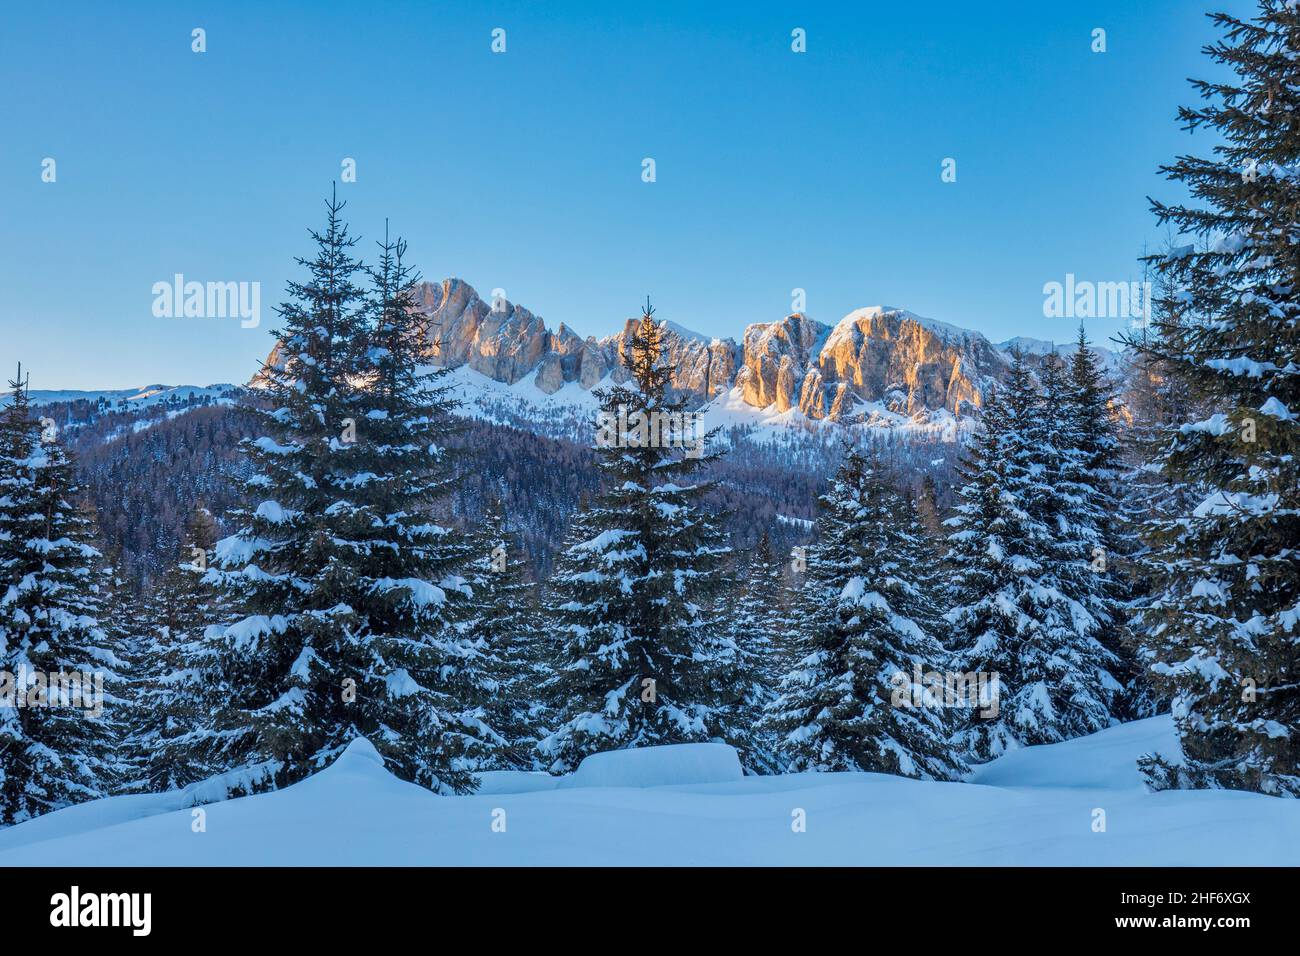 The peaks of the Setsass seen through a snow-covered fir forest,  Livinallongo del Col di Lana,  province of Belluno,  Veneto,  Italy Stock Photo